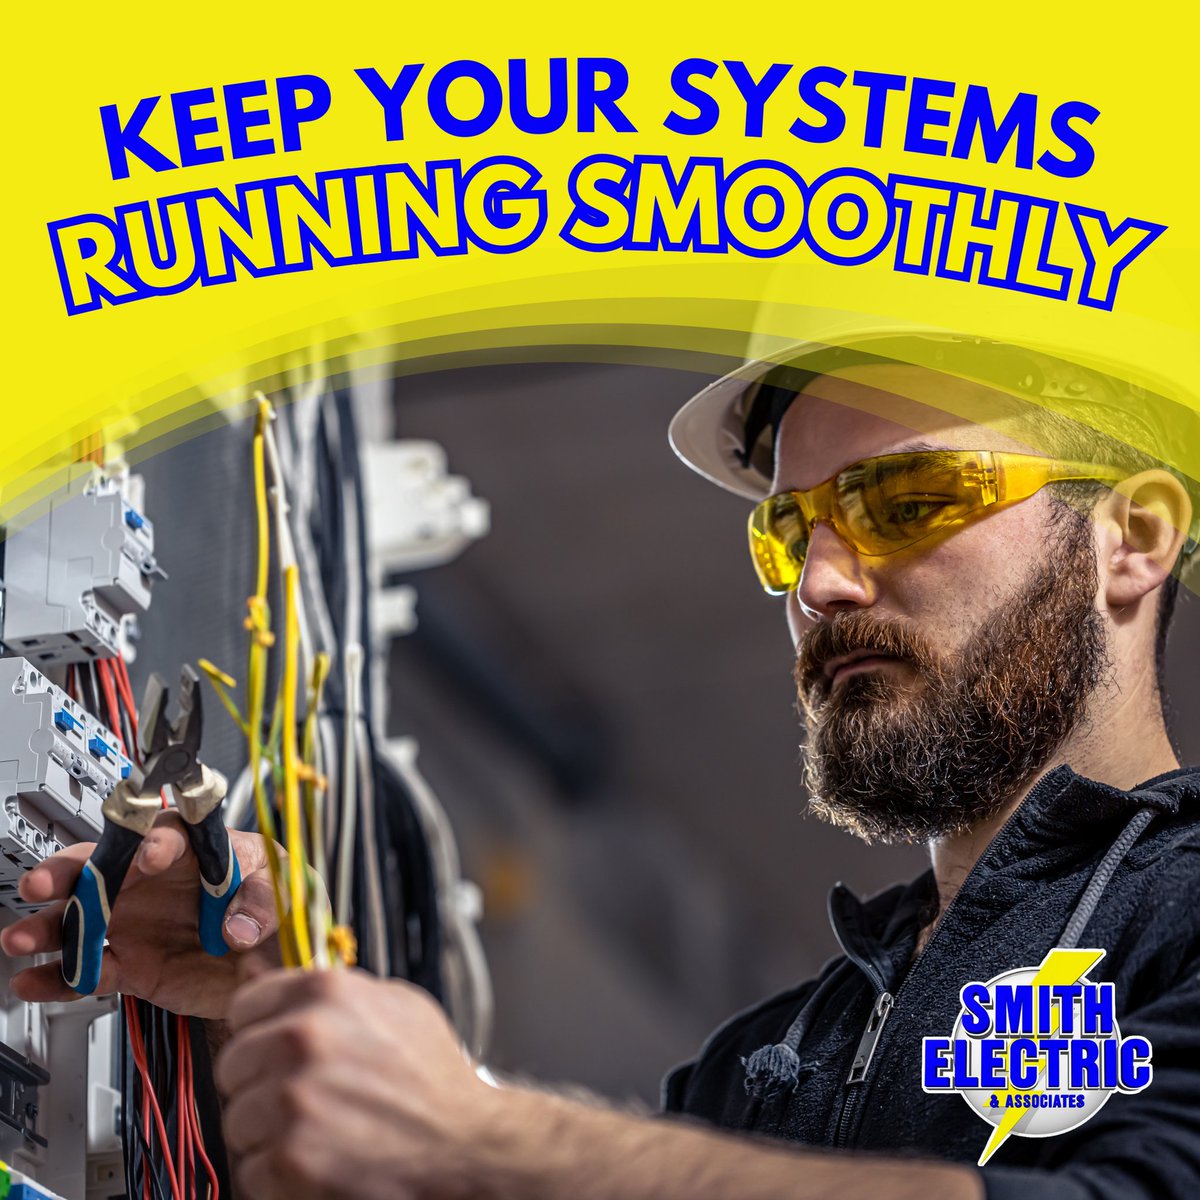 Don't let electrical issues disrupt your day. Our team of skilled professionals is equipped to handle troubleshooting and repairs for residential, commercial, and industrial properties. #ElectricalRepairs #TroubleshootingExperts